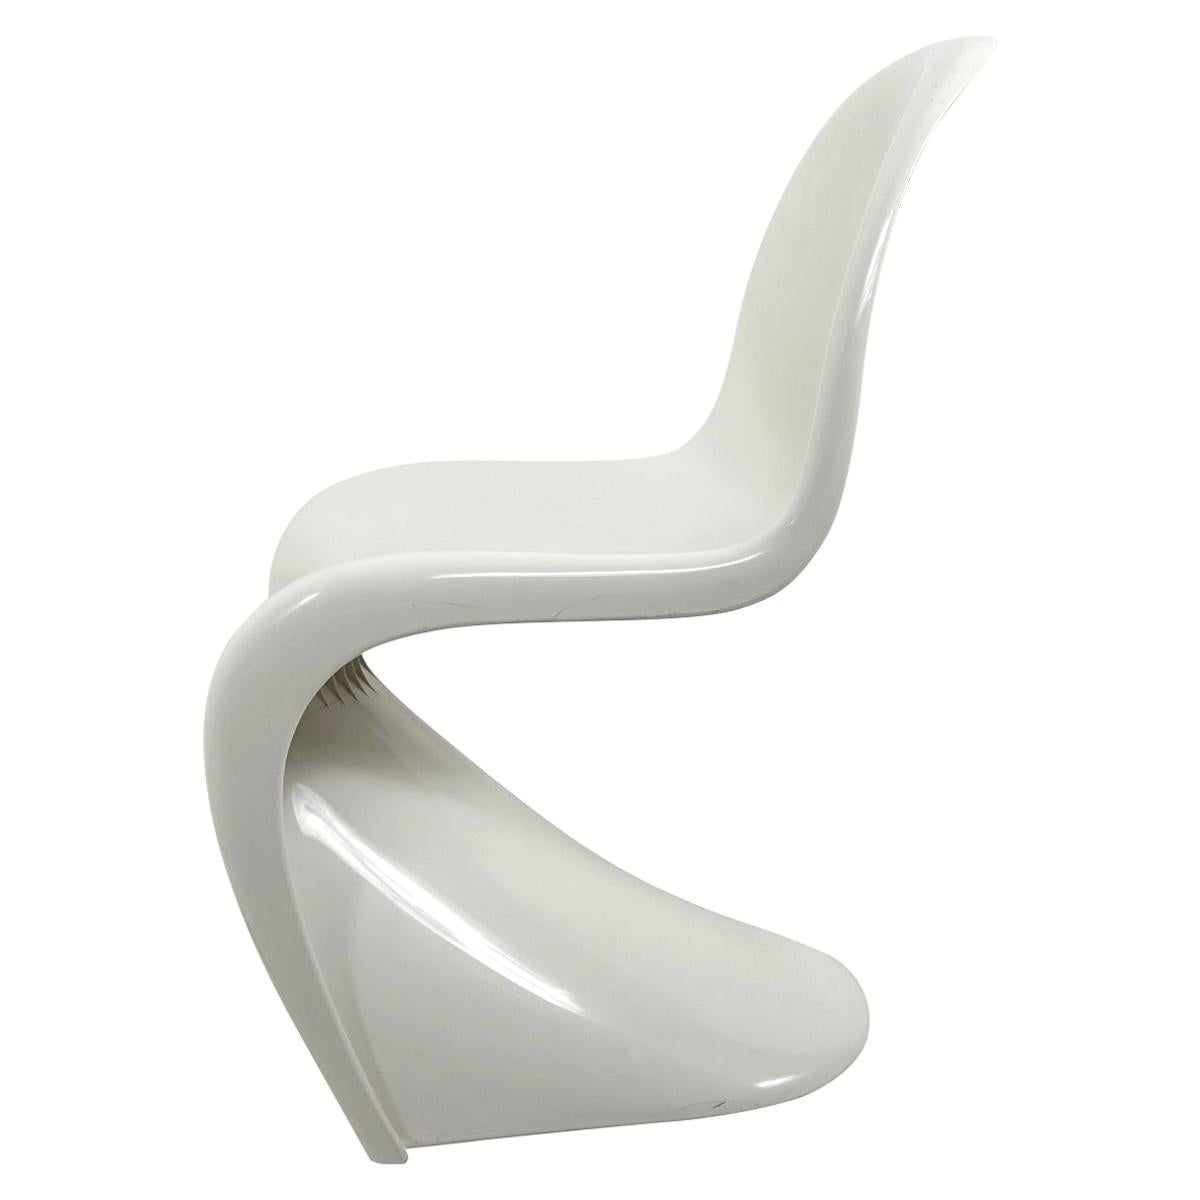 Gloss White Panton S-Chair by Verner Panton / Herman Miller Fehlbaum Production For Sale